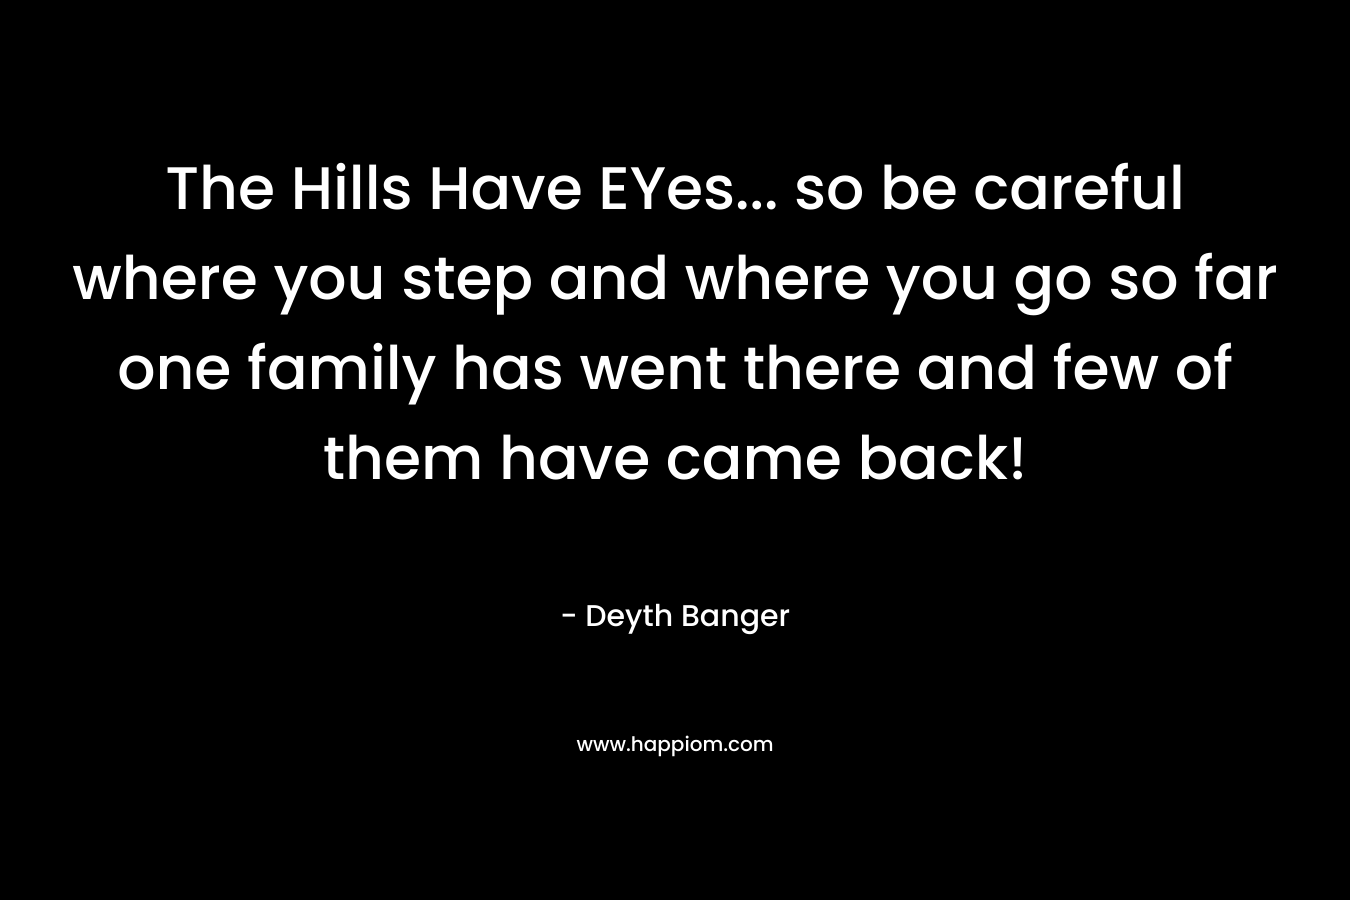 The Hills Have EYes... so be careful where you step and where you go so far one family has went there and few of them have came back!